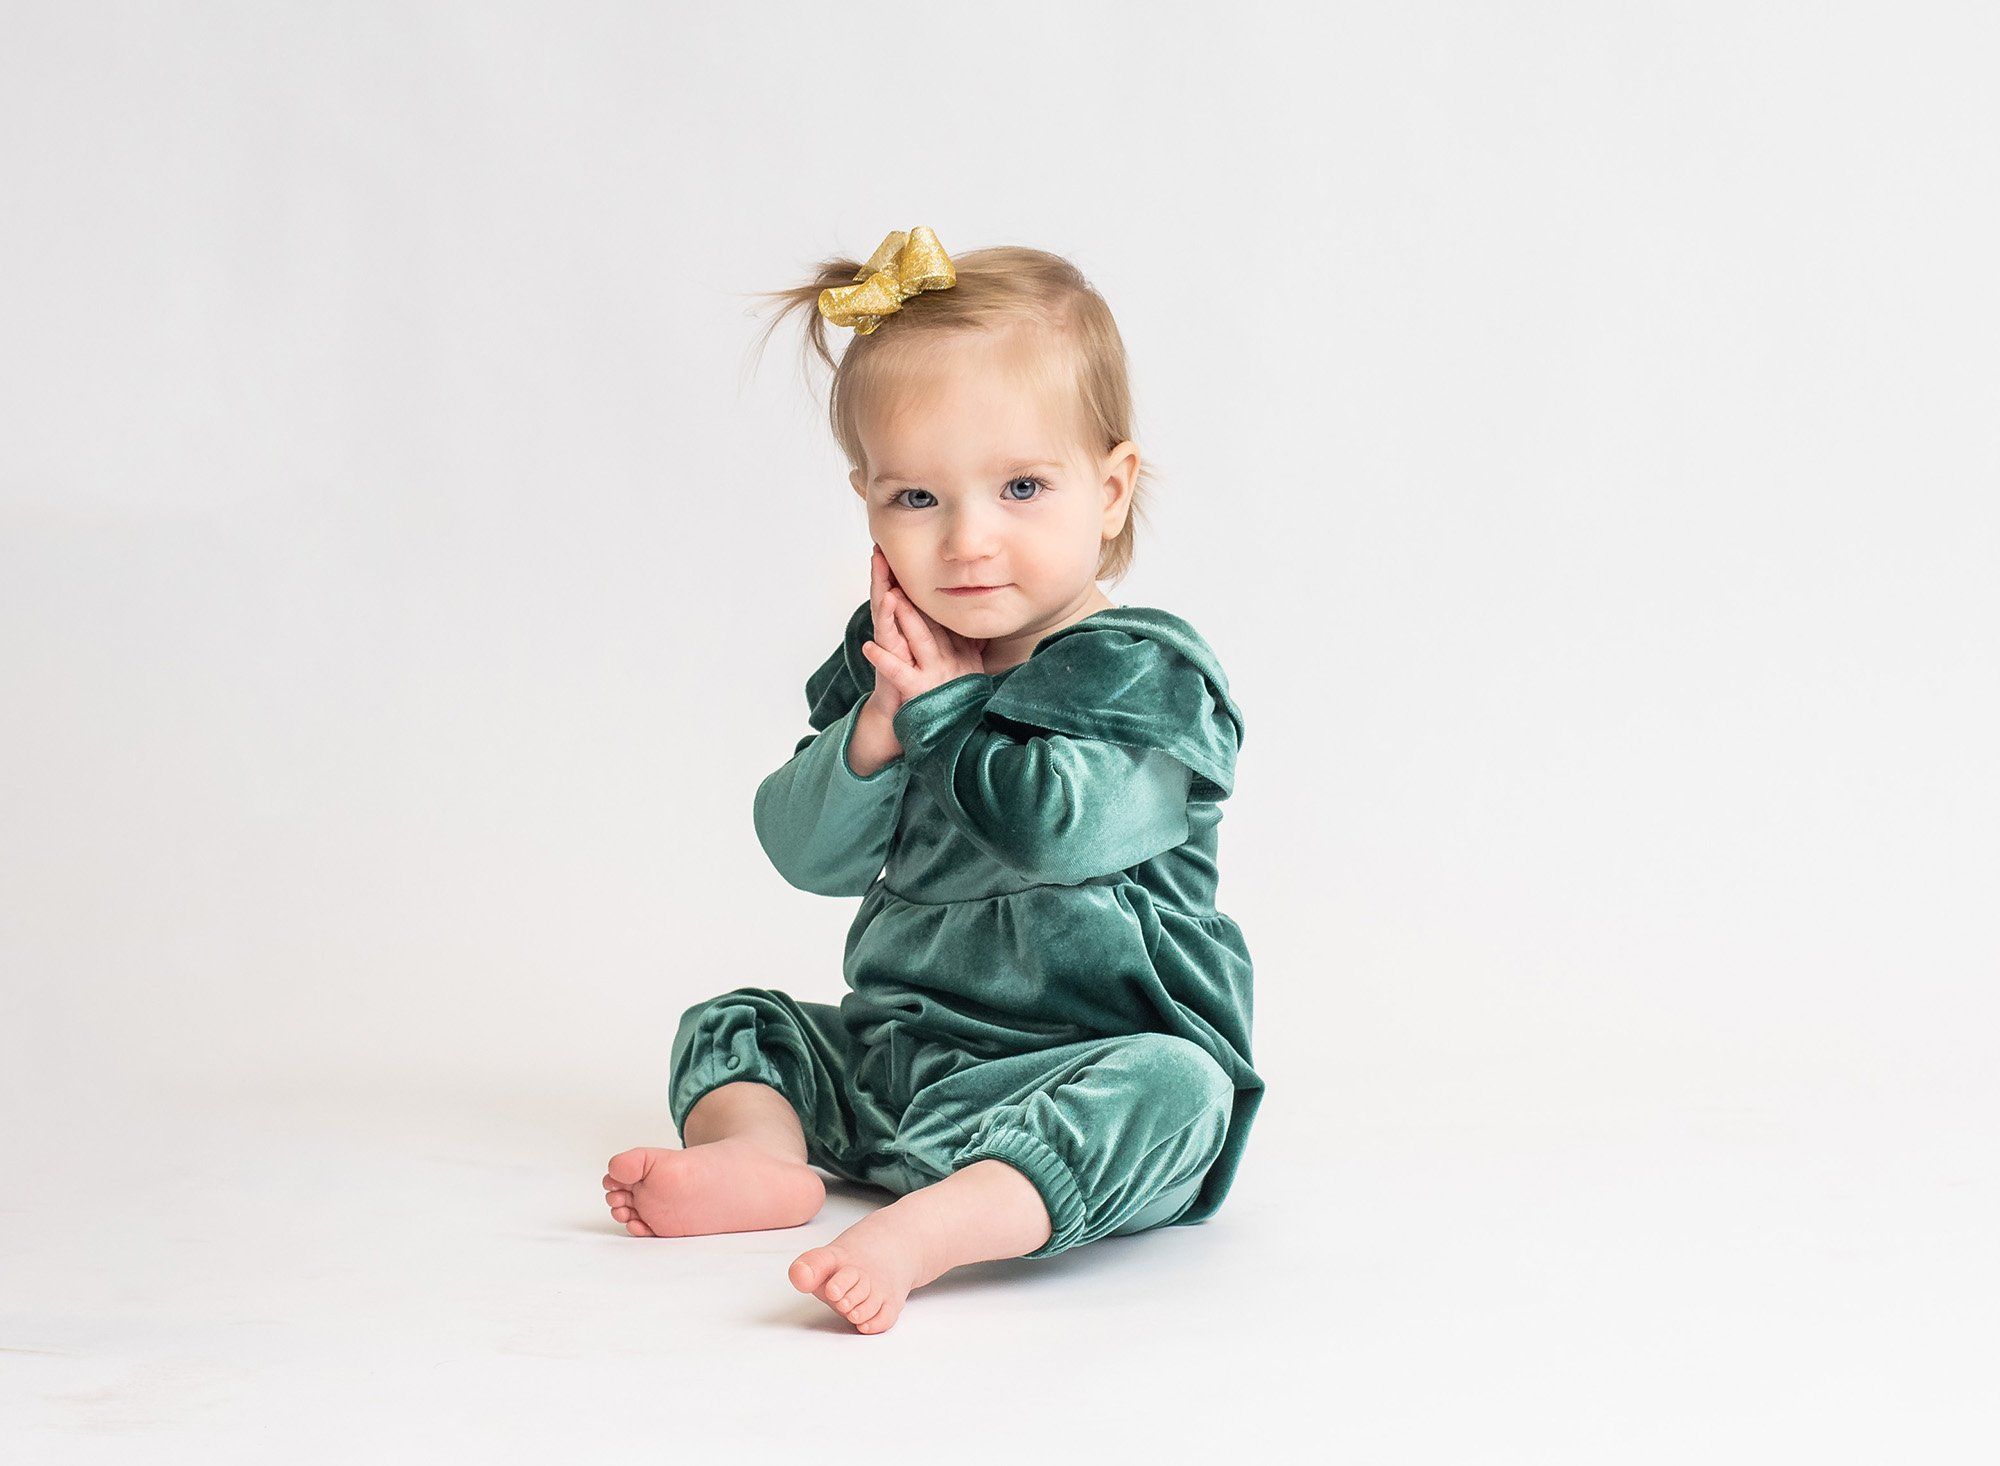 little girl looking at the camera wearing green with a white background